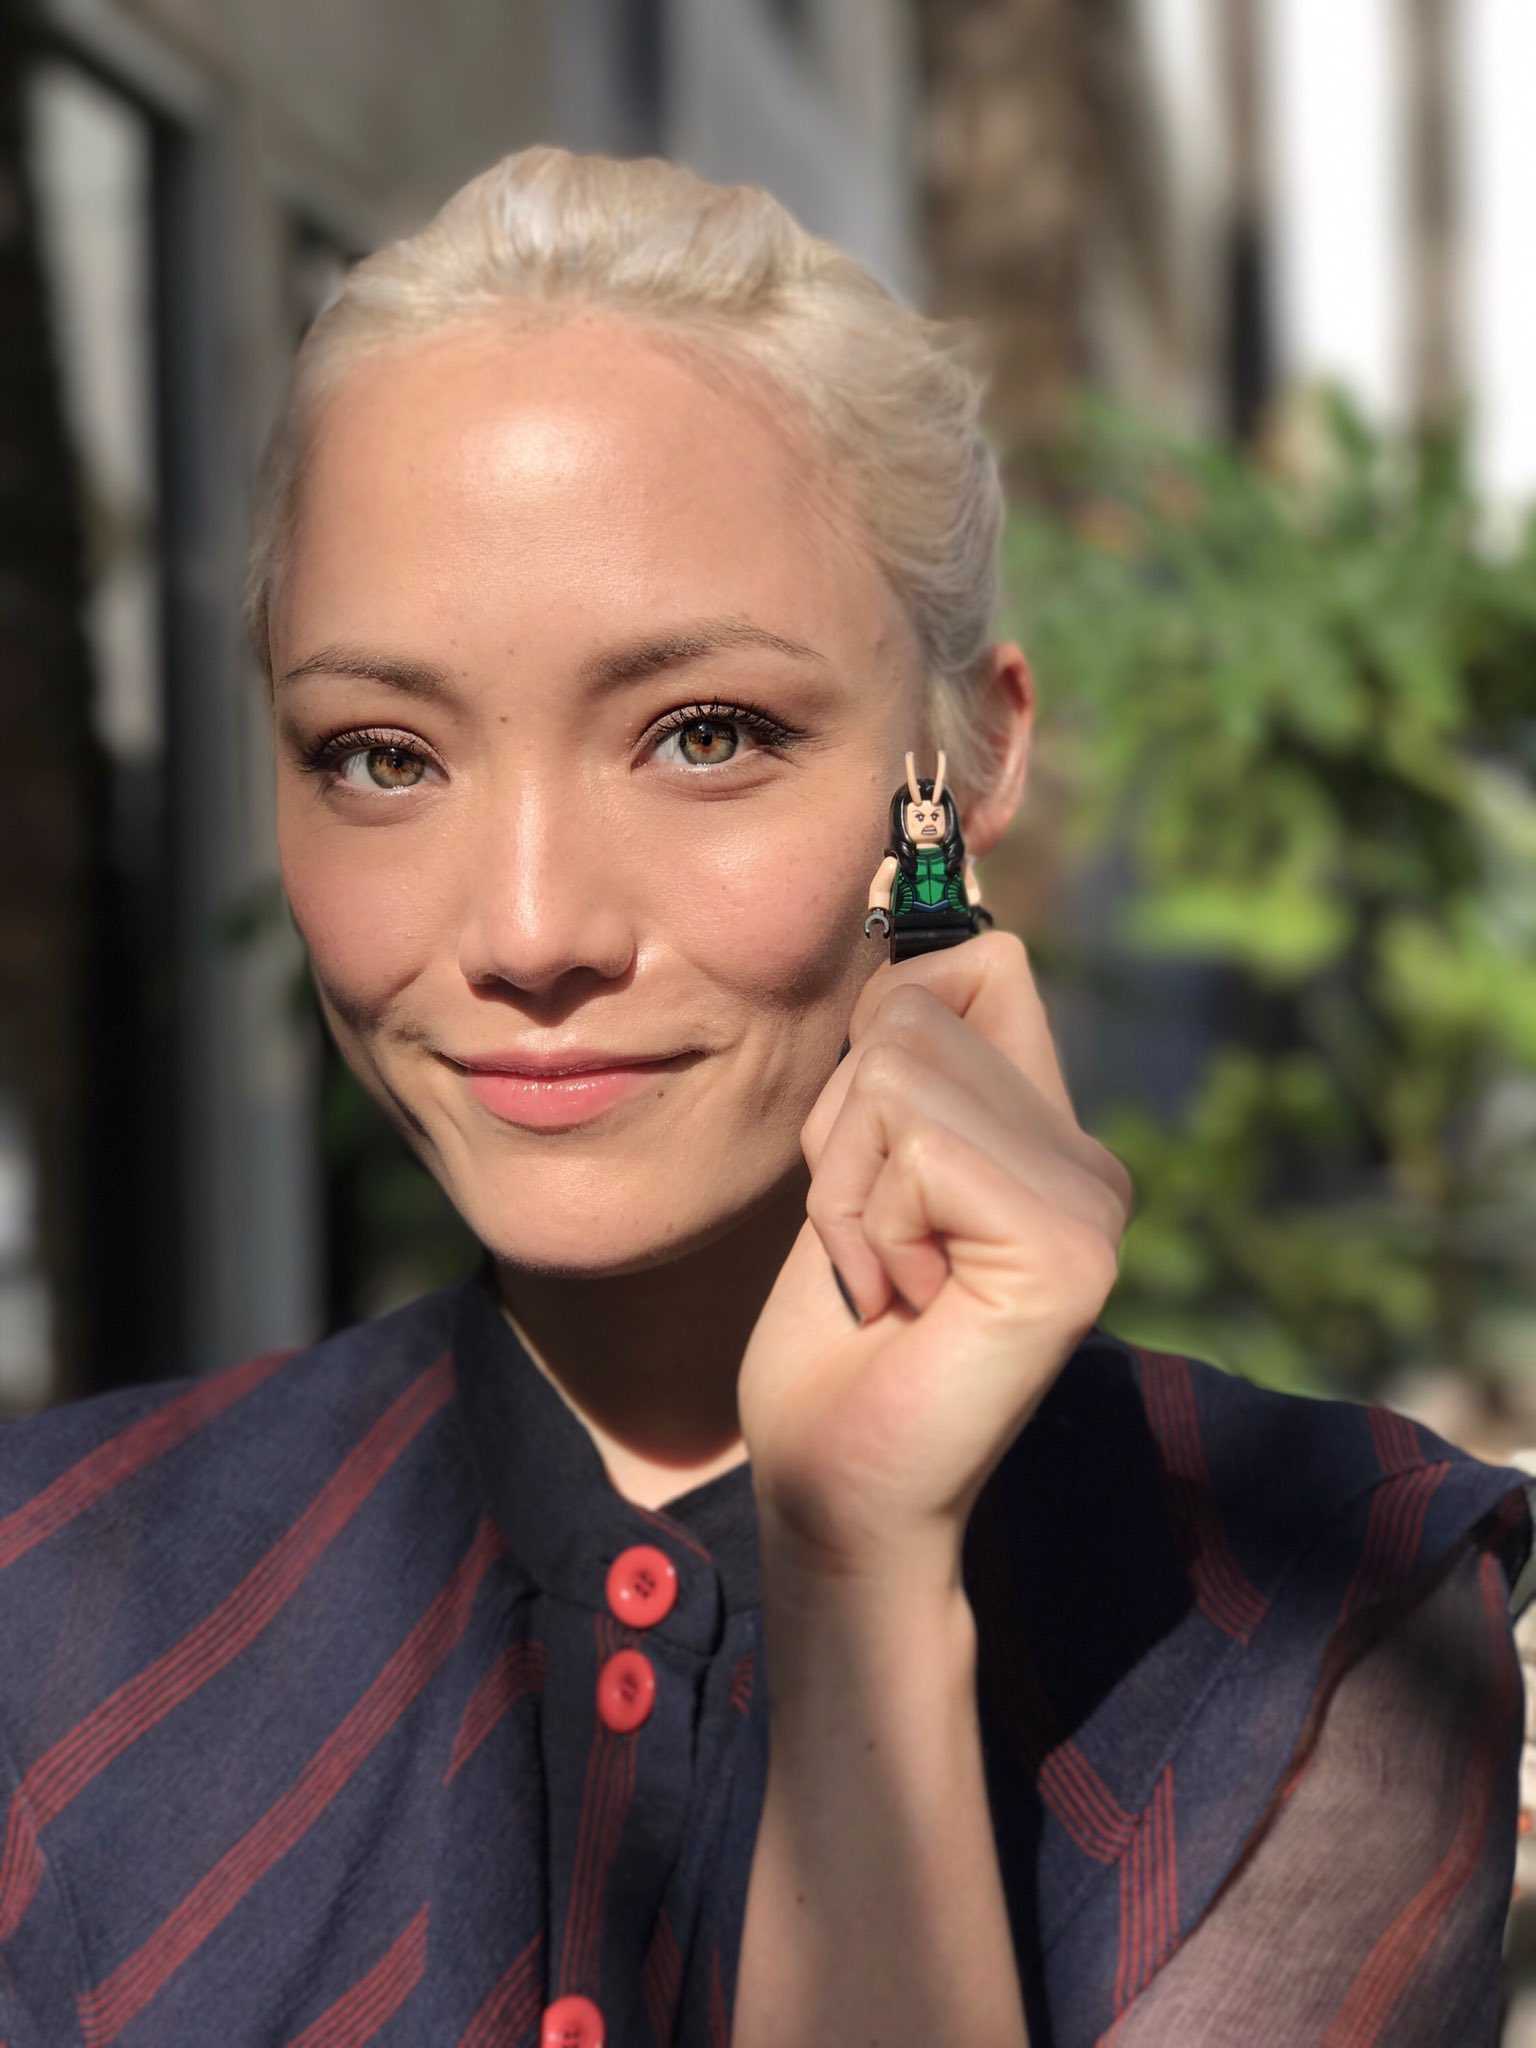 70+ Hot Pictures Of Pom Klementieff Who Plays Mantis In Marvel Cinematic Universe 8